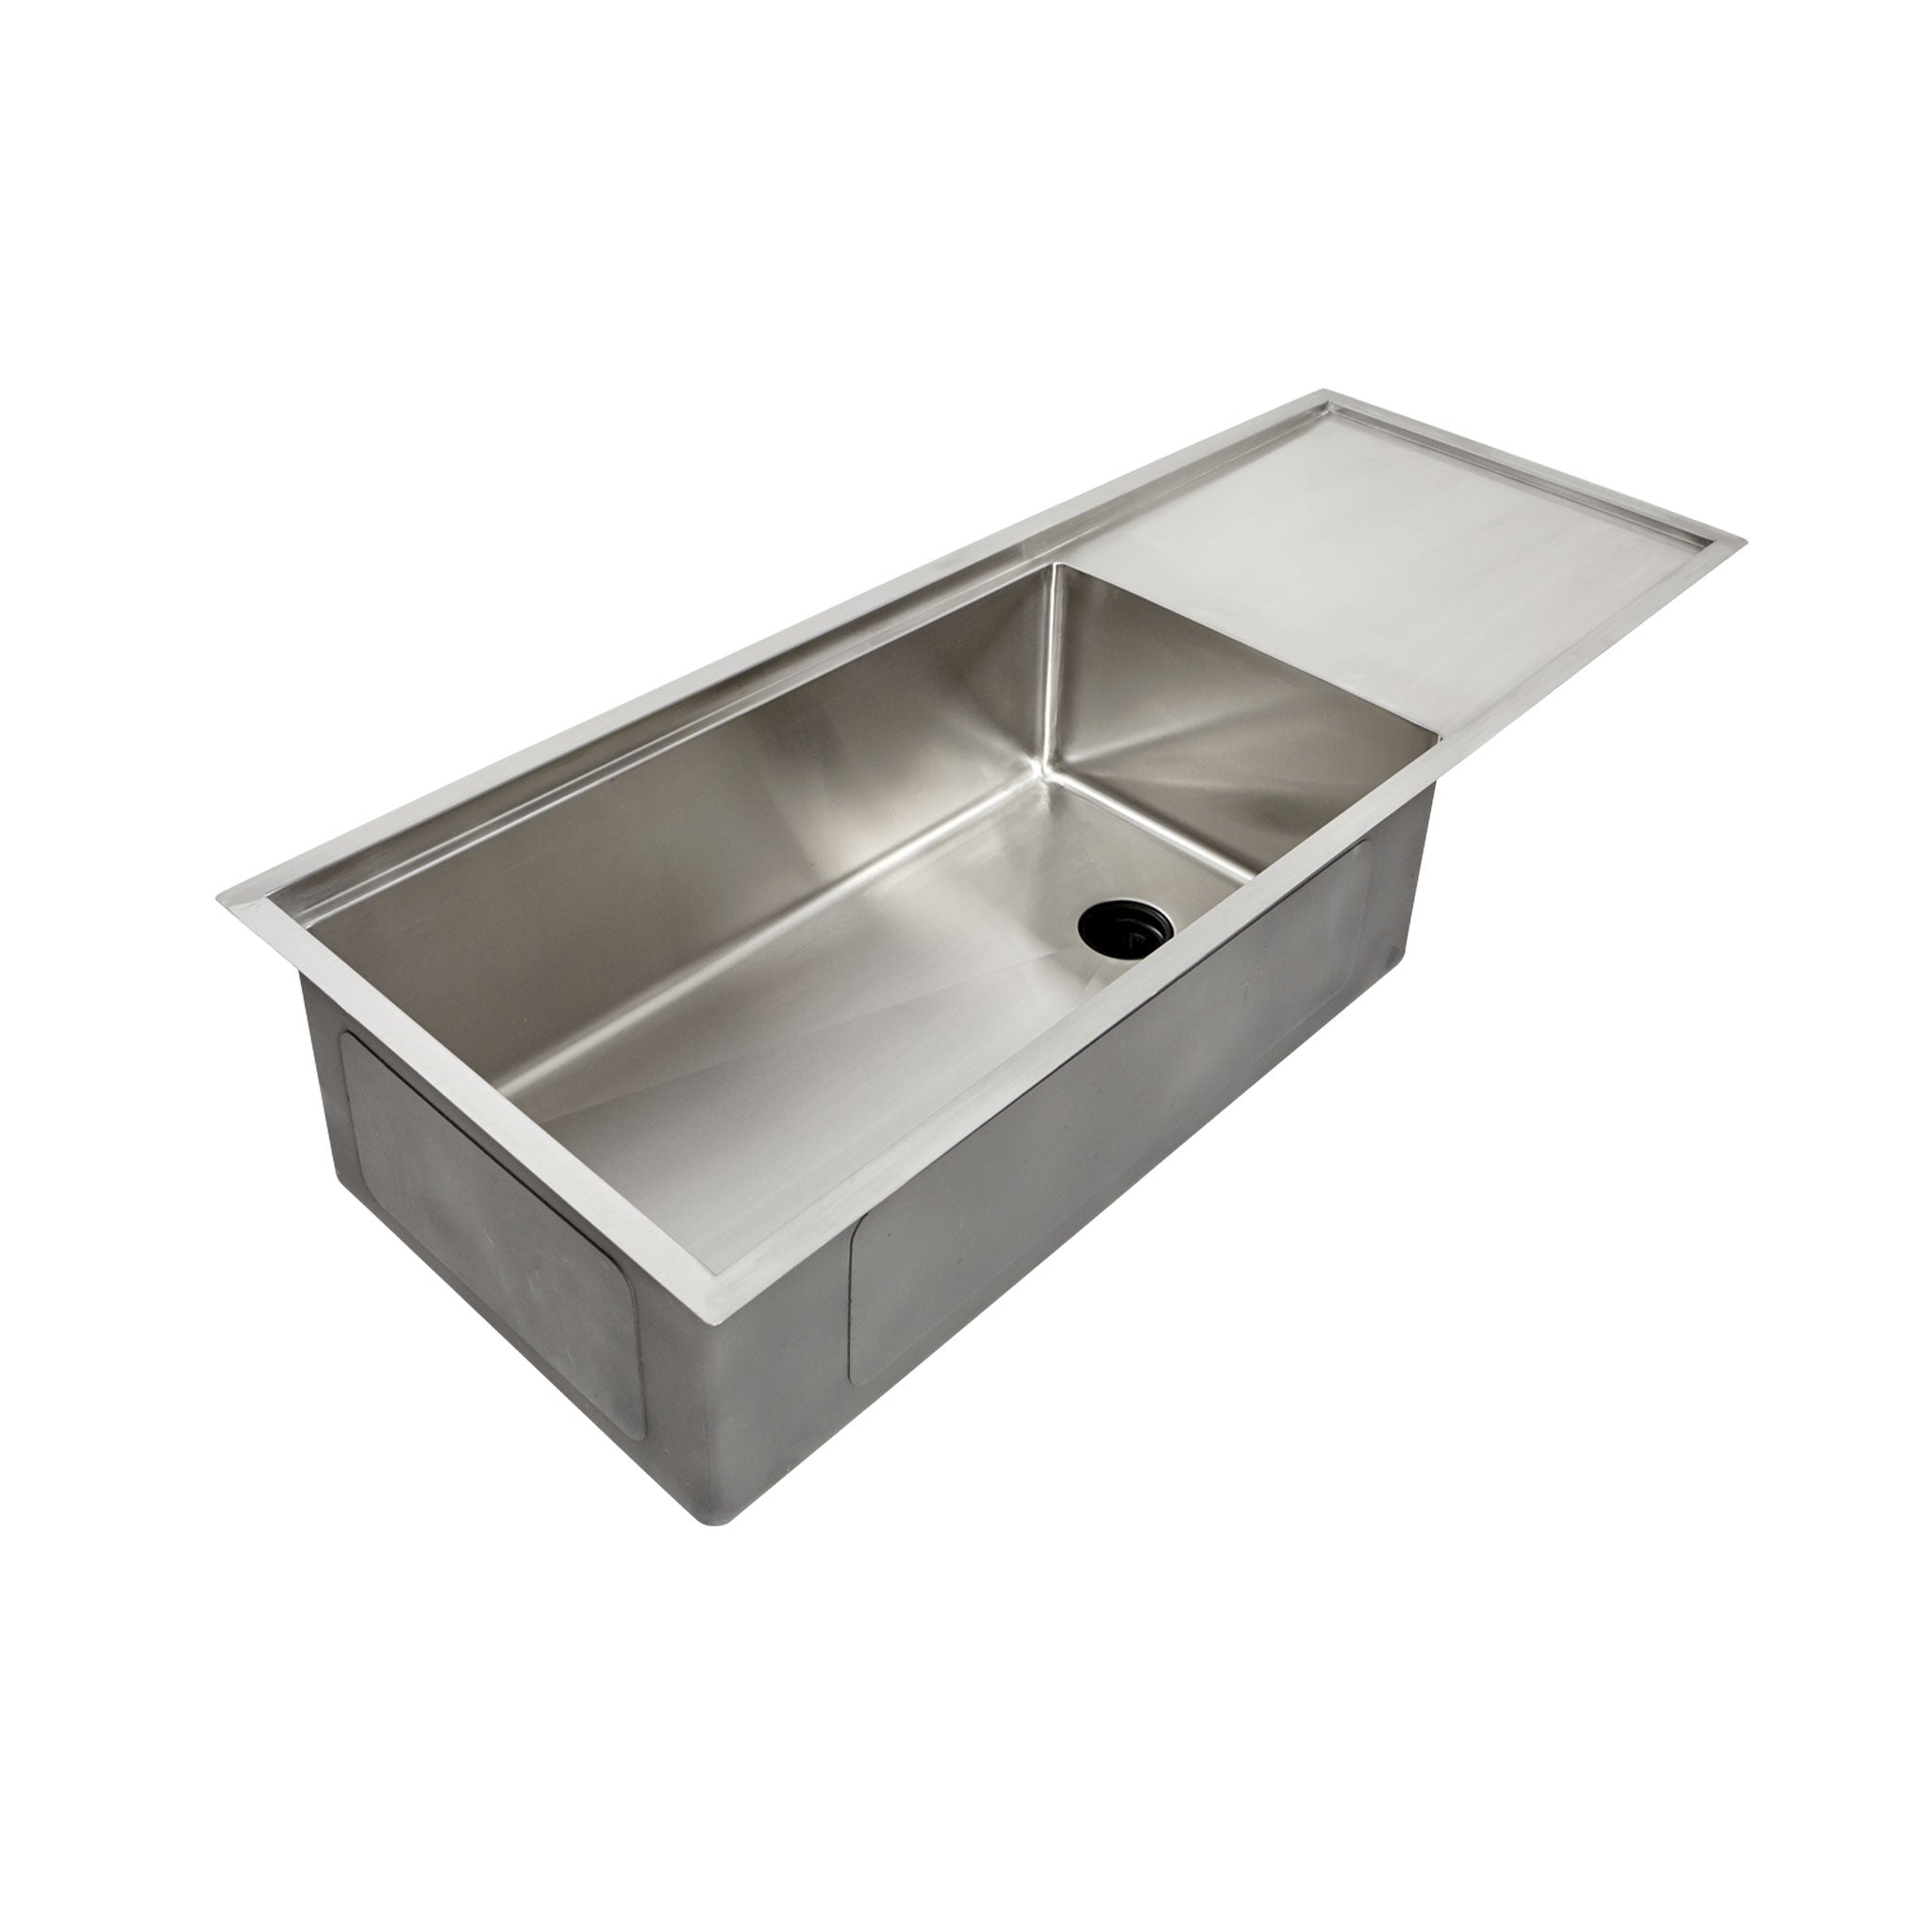 47 inch total length stainless steel undermount workstation kitchen sink with single basin and centered reversible drain